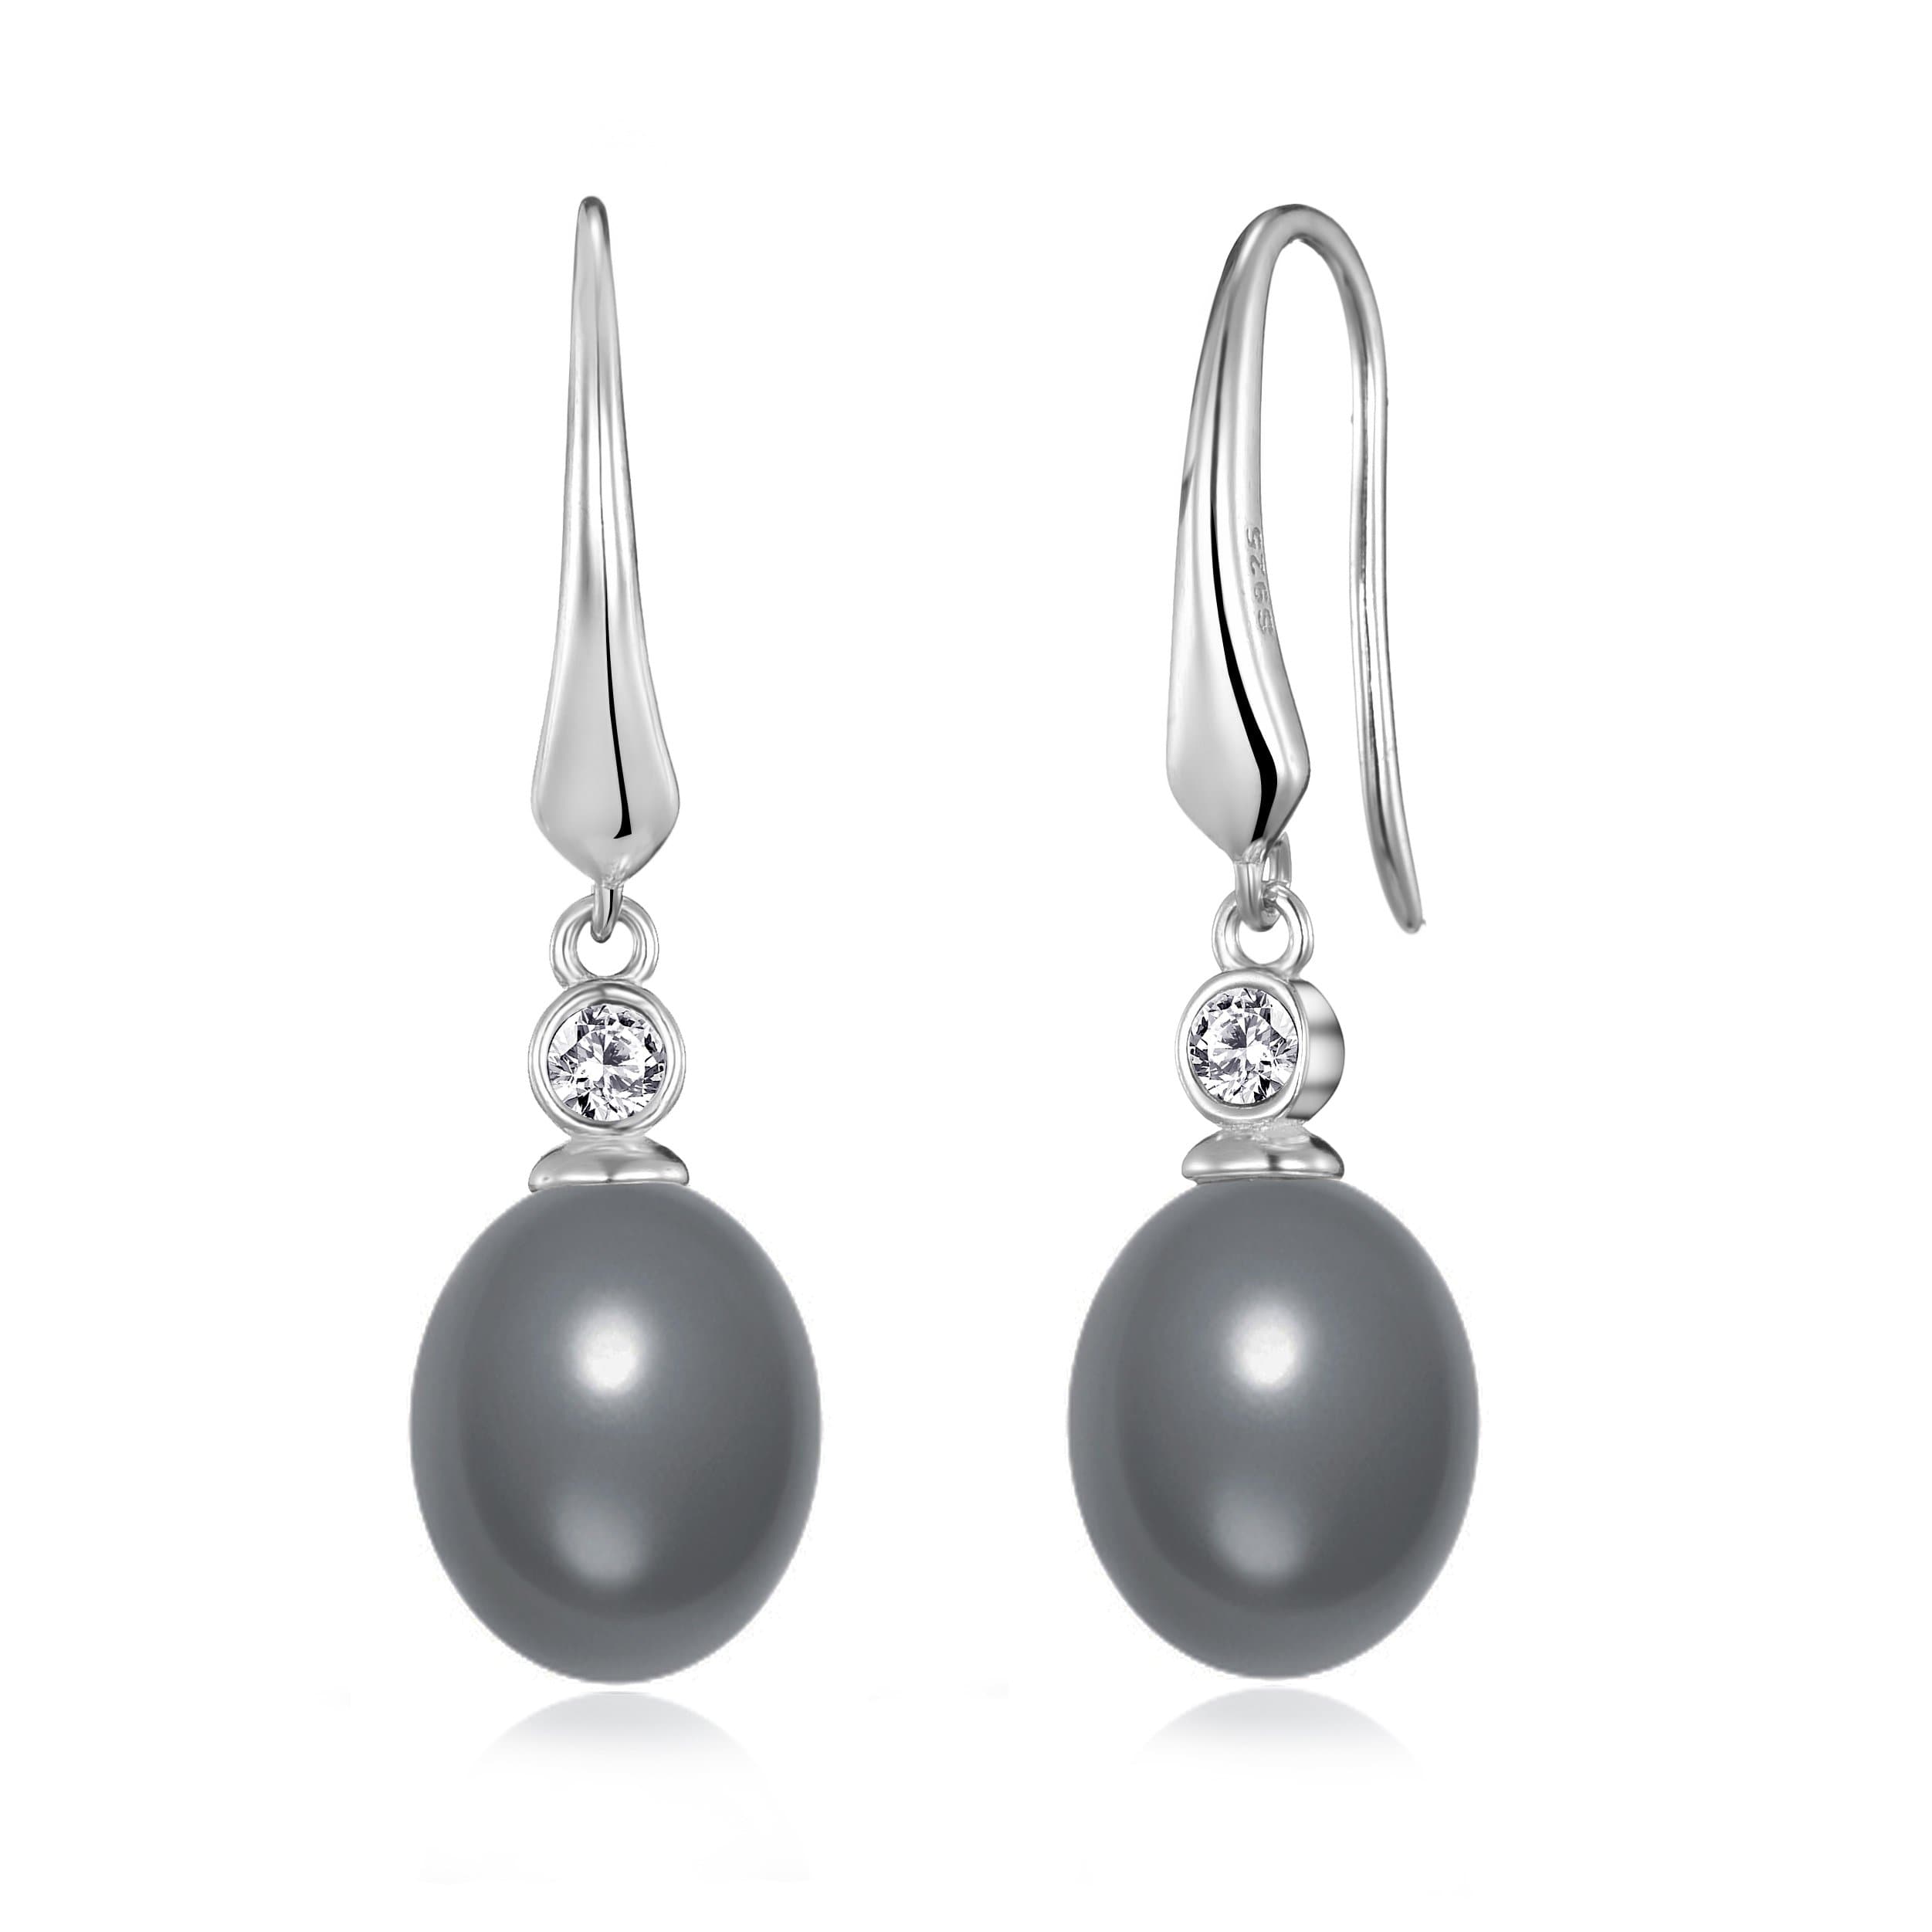 Sterling Silver Grey Pearl Drop Earrings Created with Zircondia® Crystals by Philip Jones Jewellery